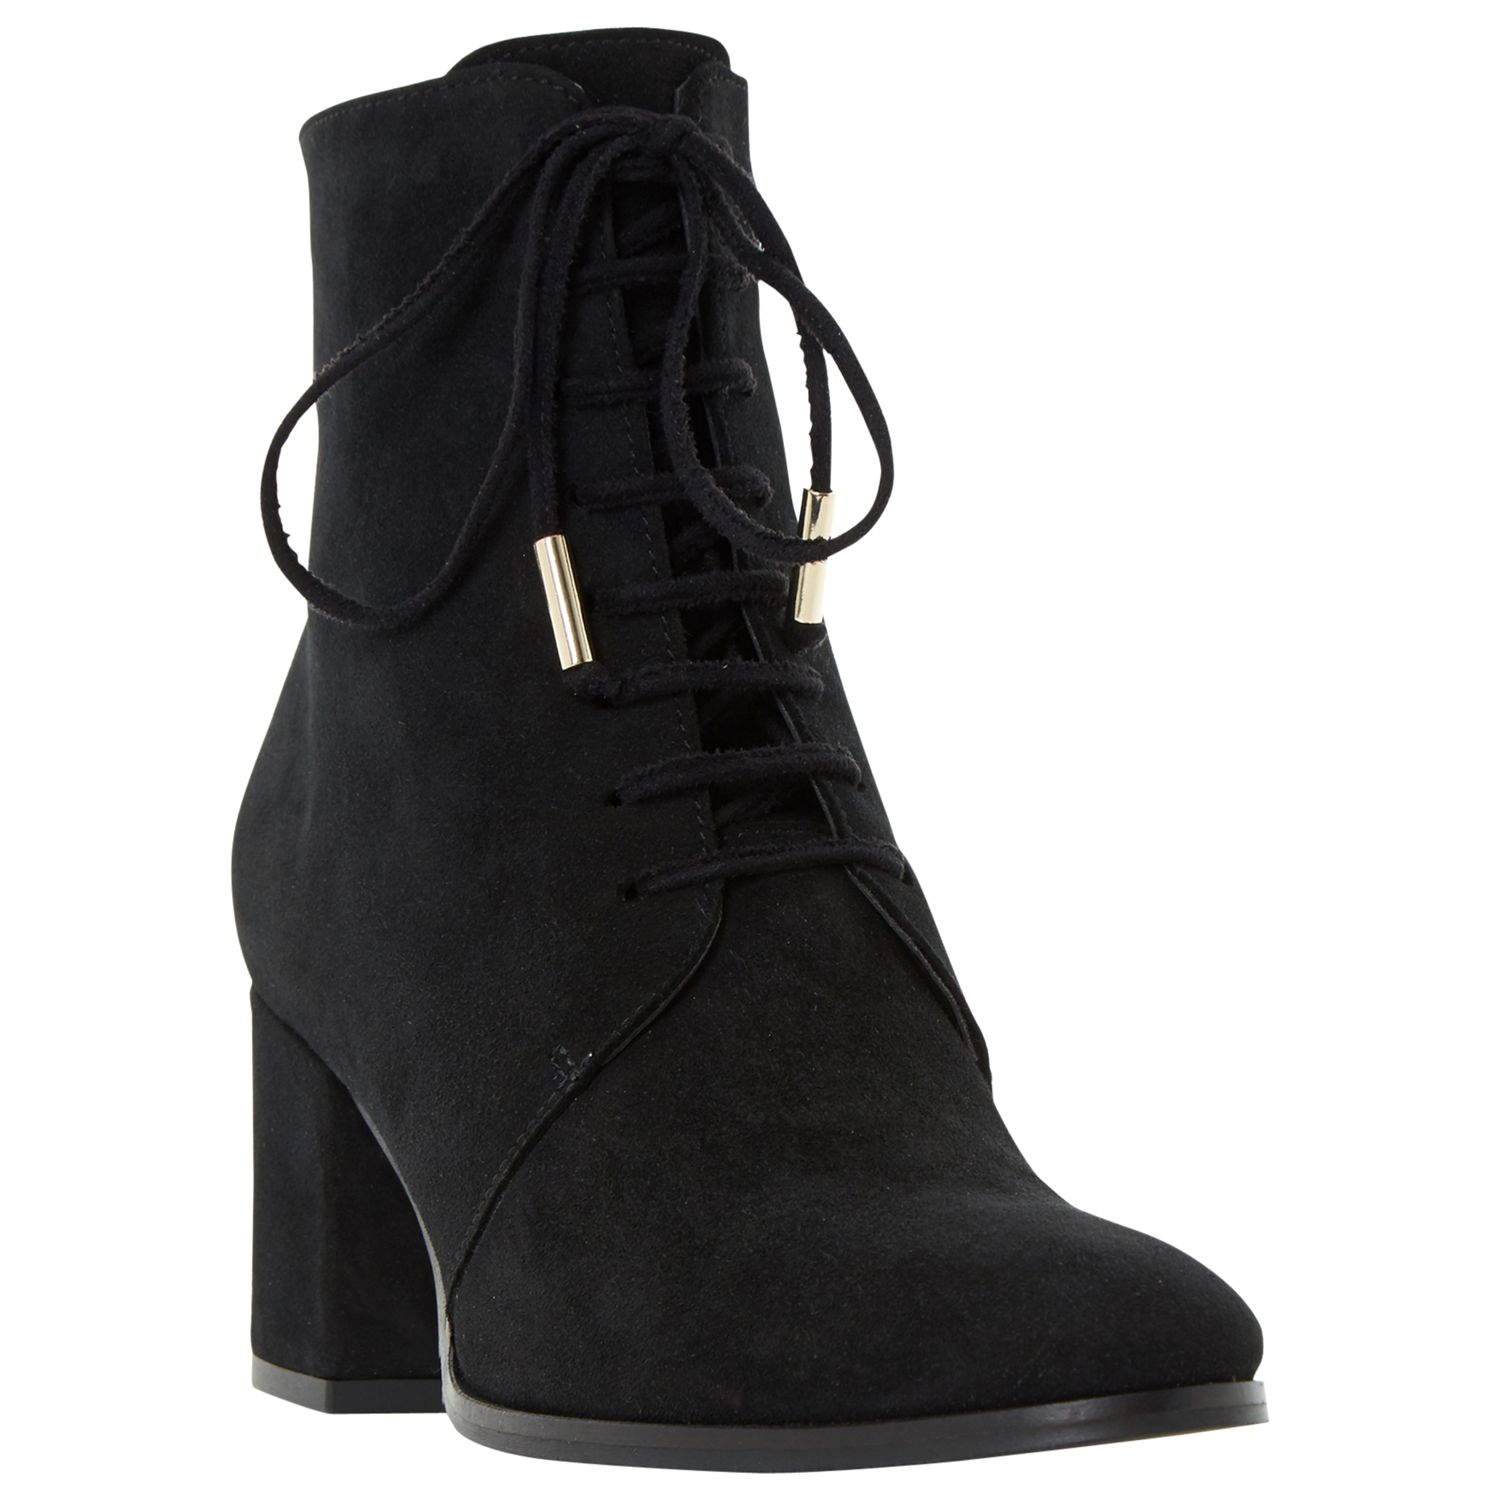 Dune Olita Lace Up Ankle Boots, Black, 8